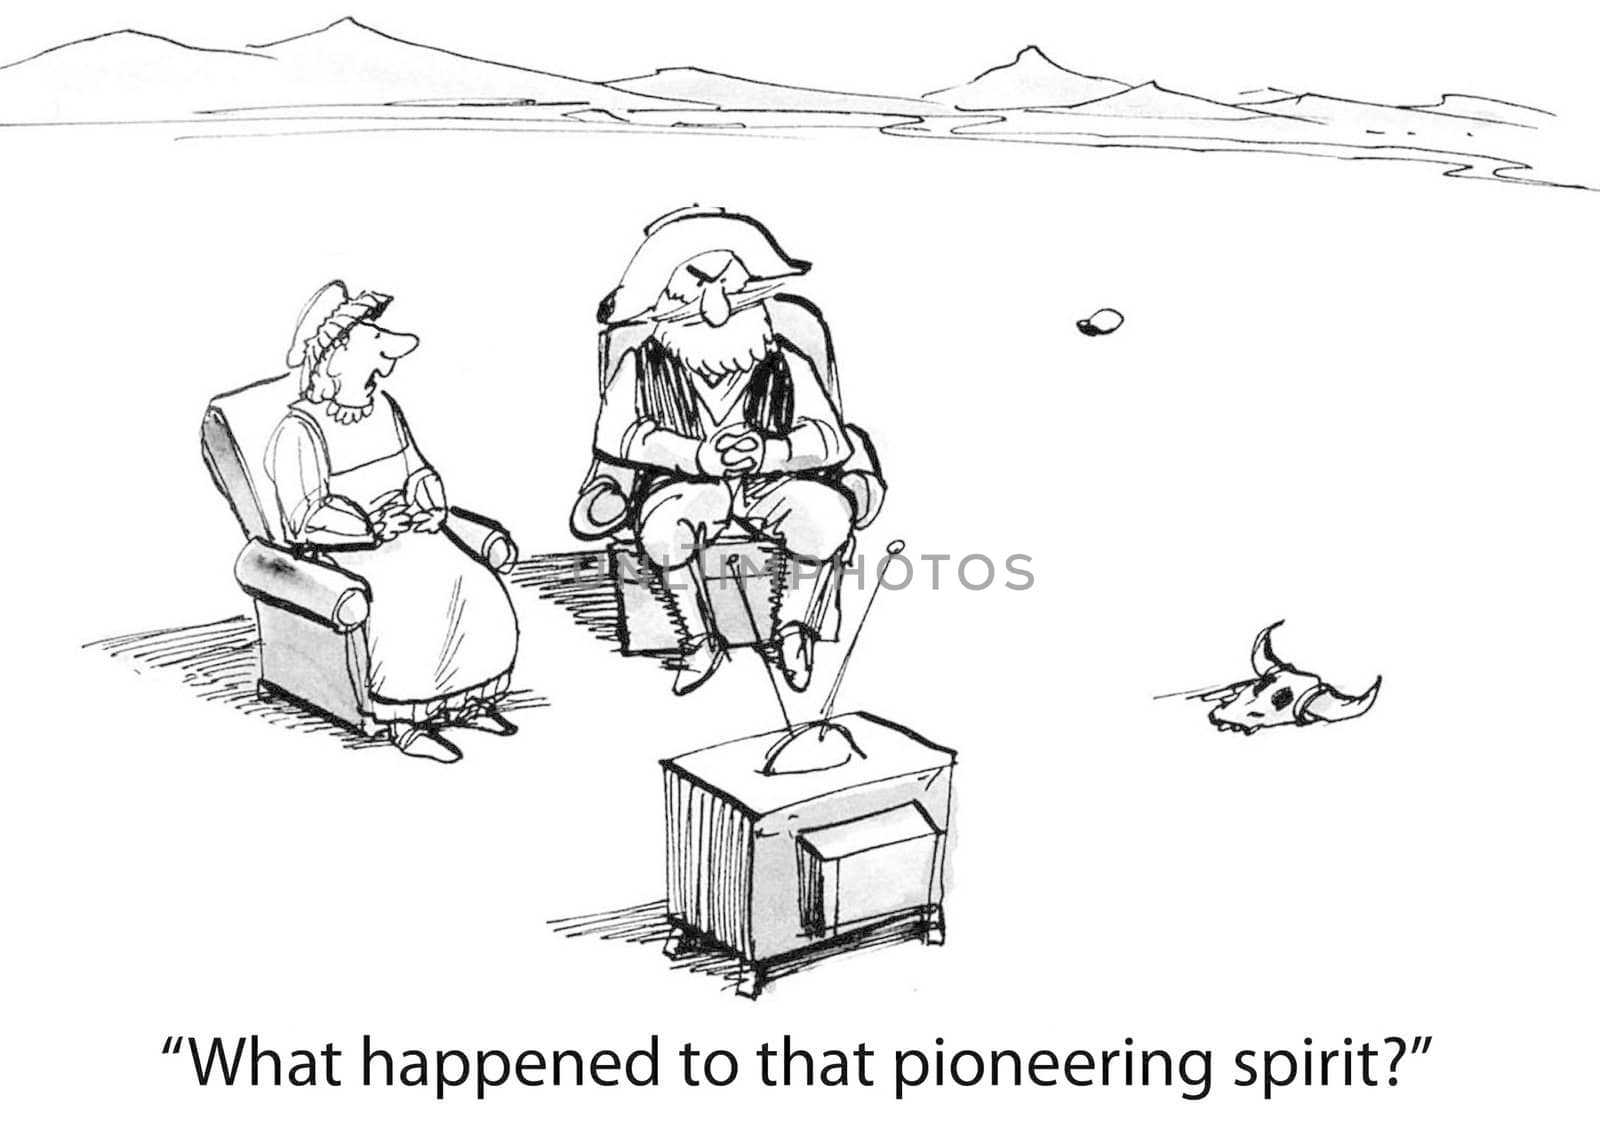 "What happened to that pioneering spirit?"